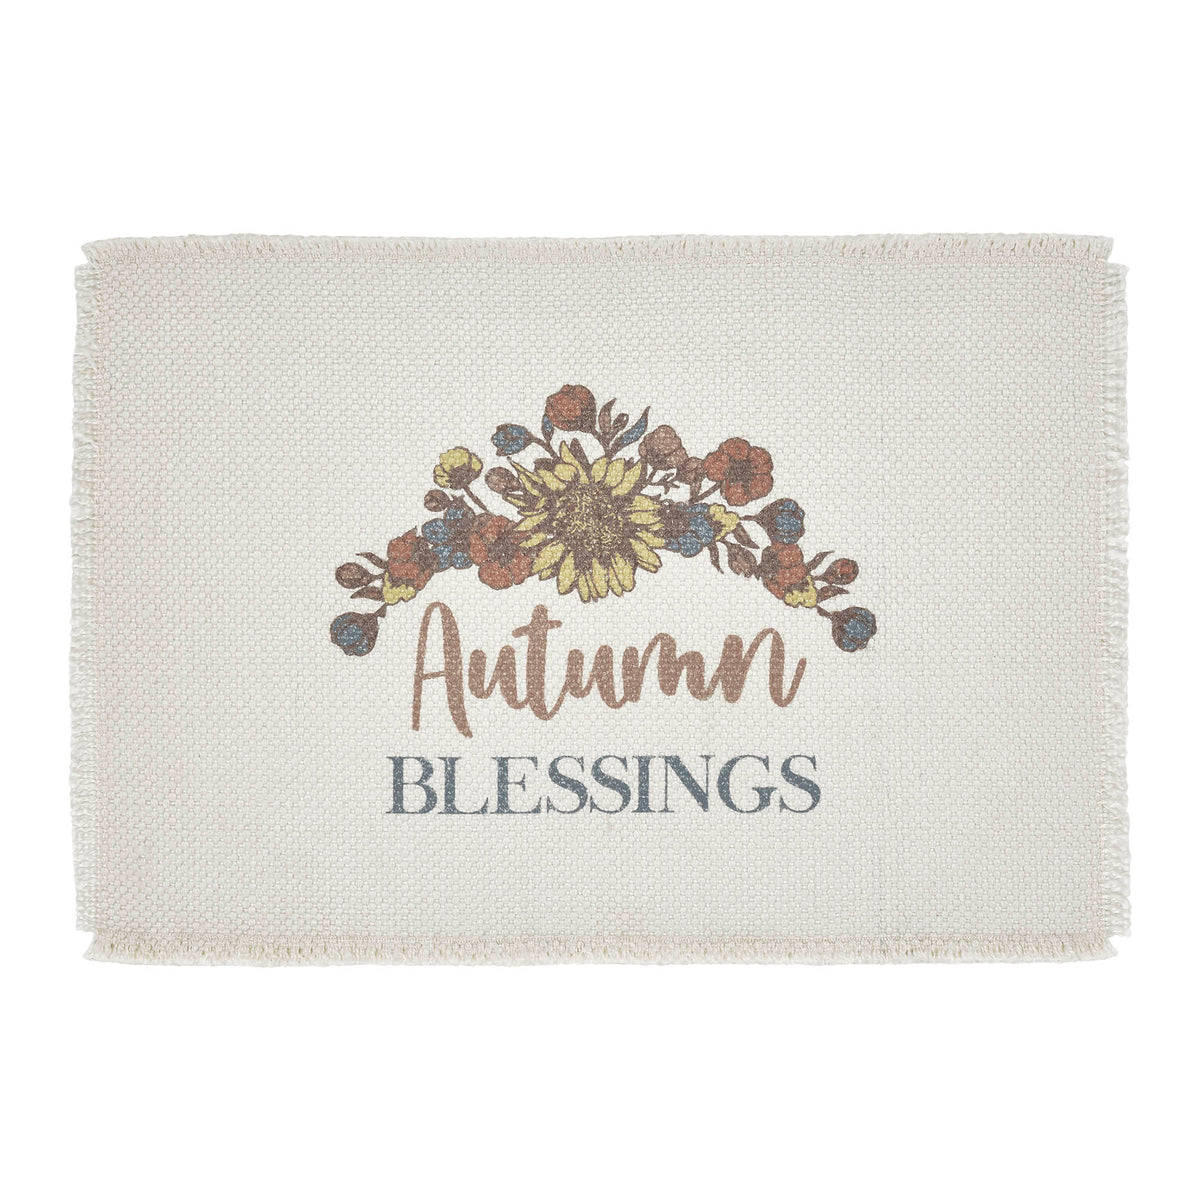 Bountifall Autumn Blessings Placemat Set of 2 13x19